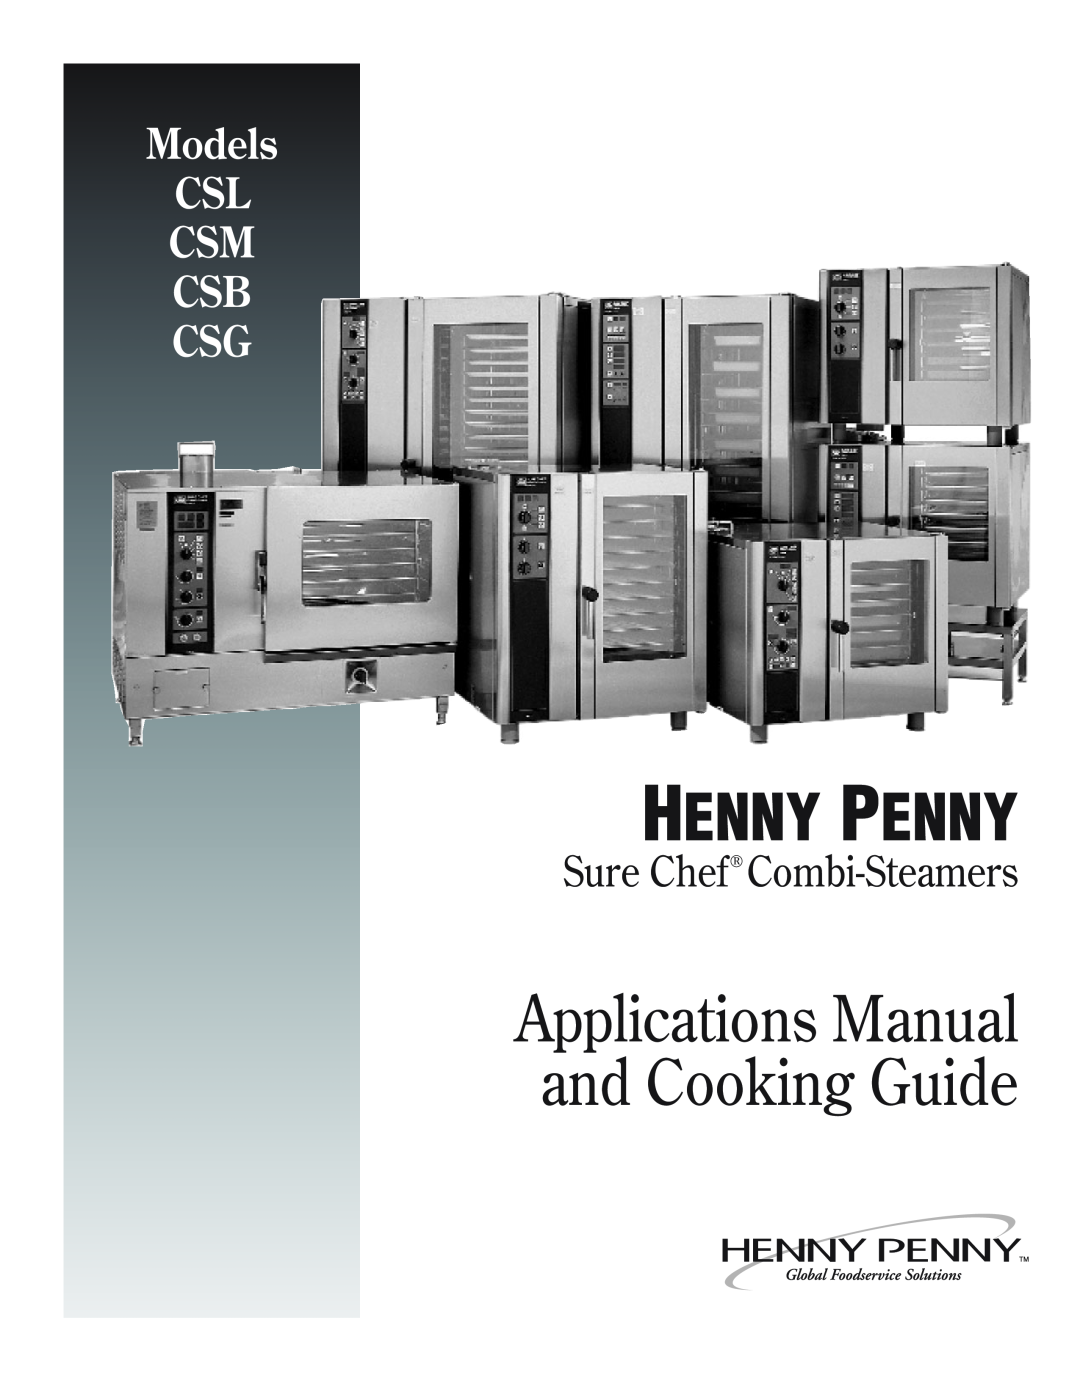 Henny Penny CSG manual Sure Chef Combi-Steamers, Henny Penny, Applications Manual and Cooking Guide 